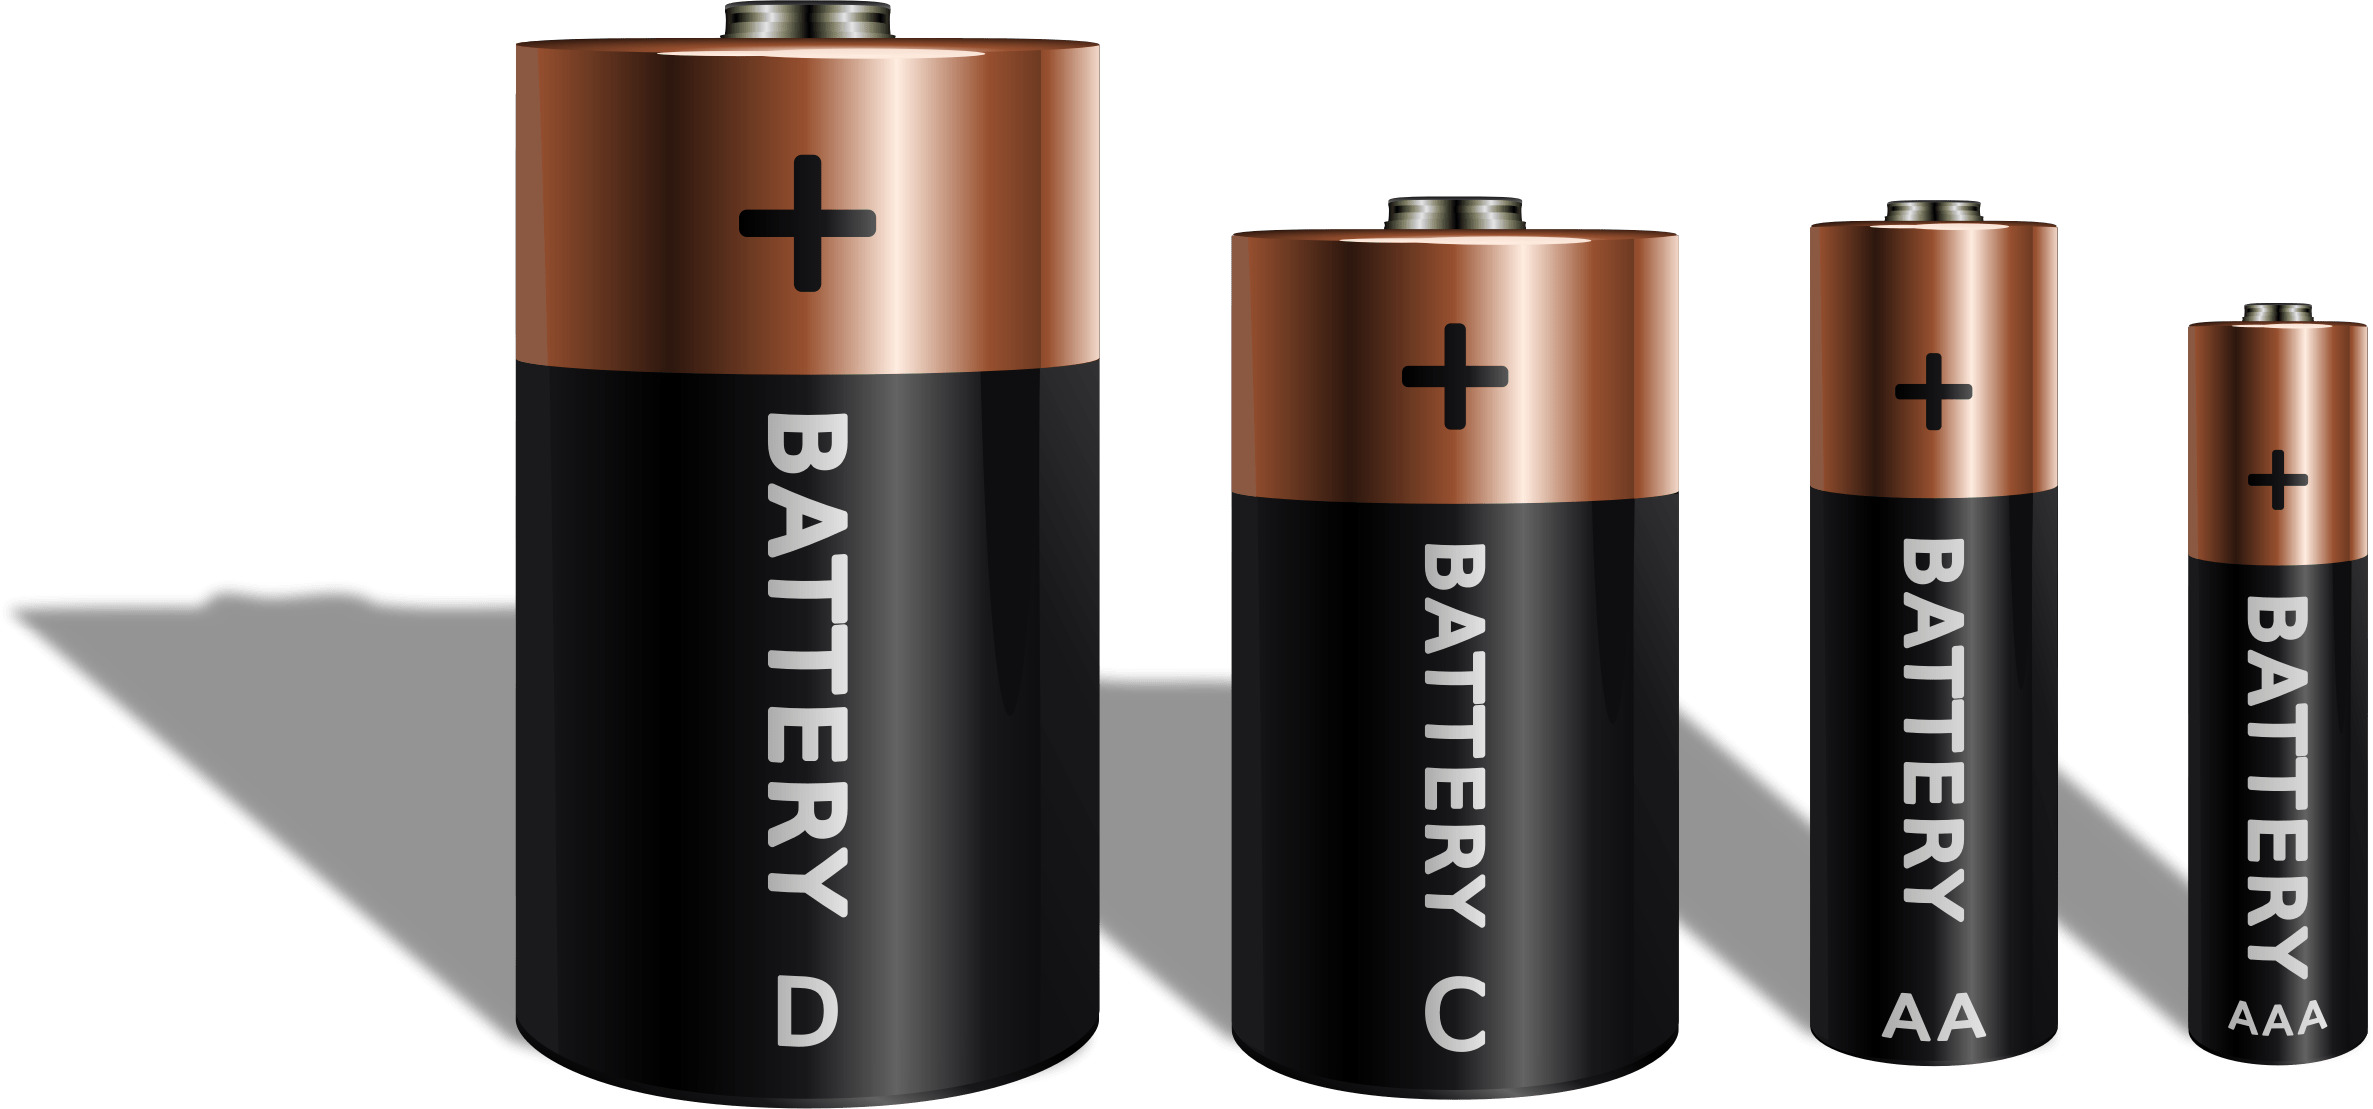 Series Of Batteries icons